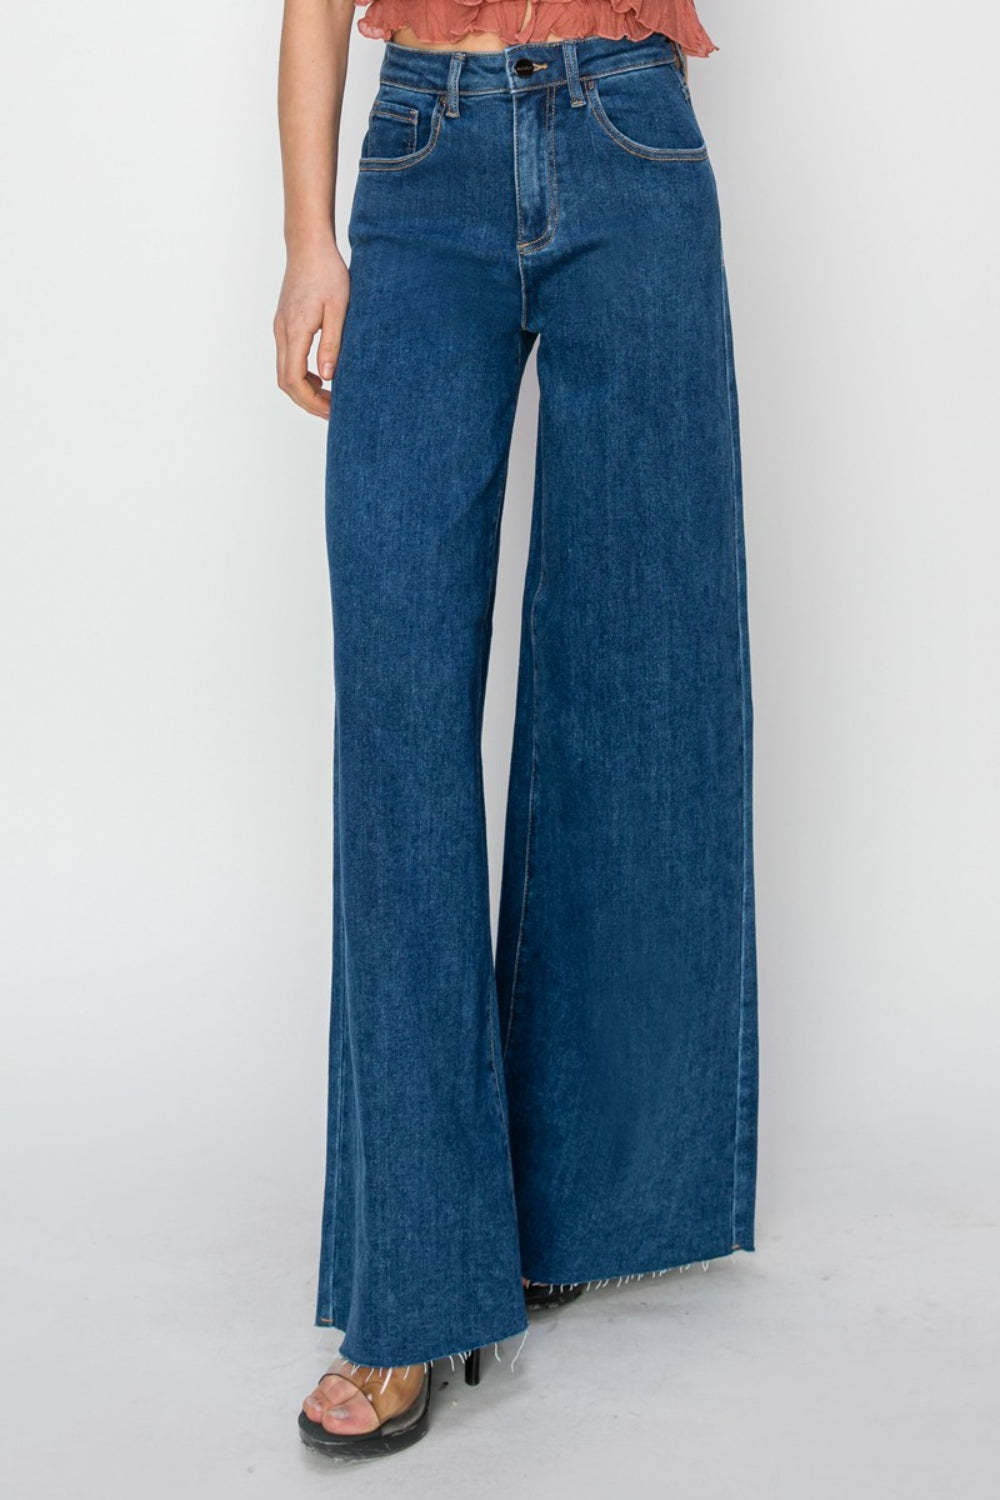 RISEN High Rise Palazzo Jeans - Online Exclusive